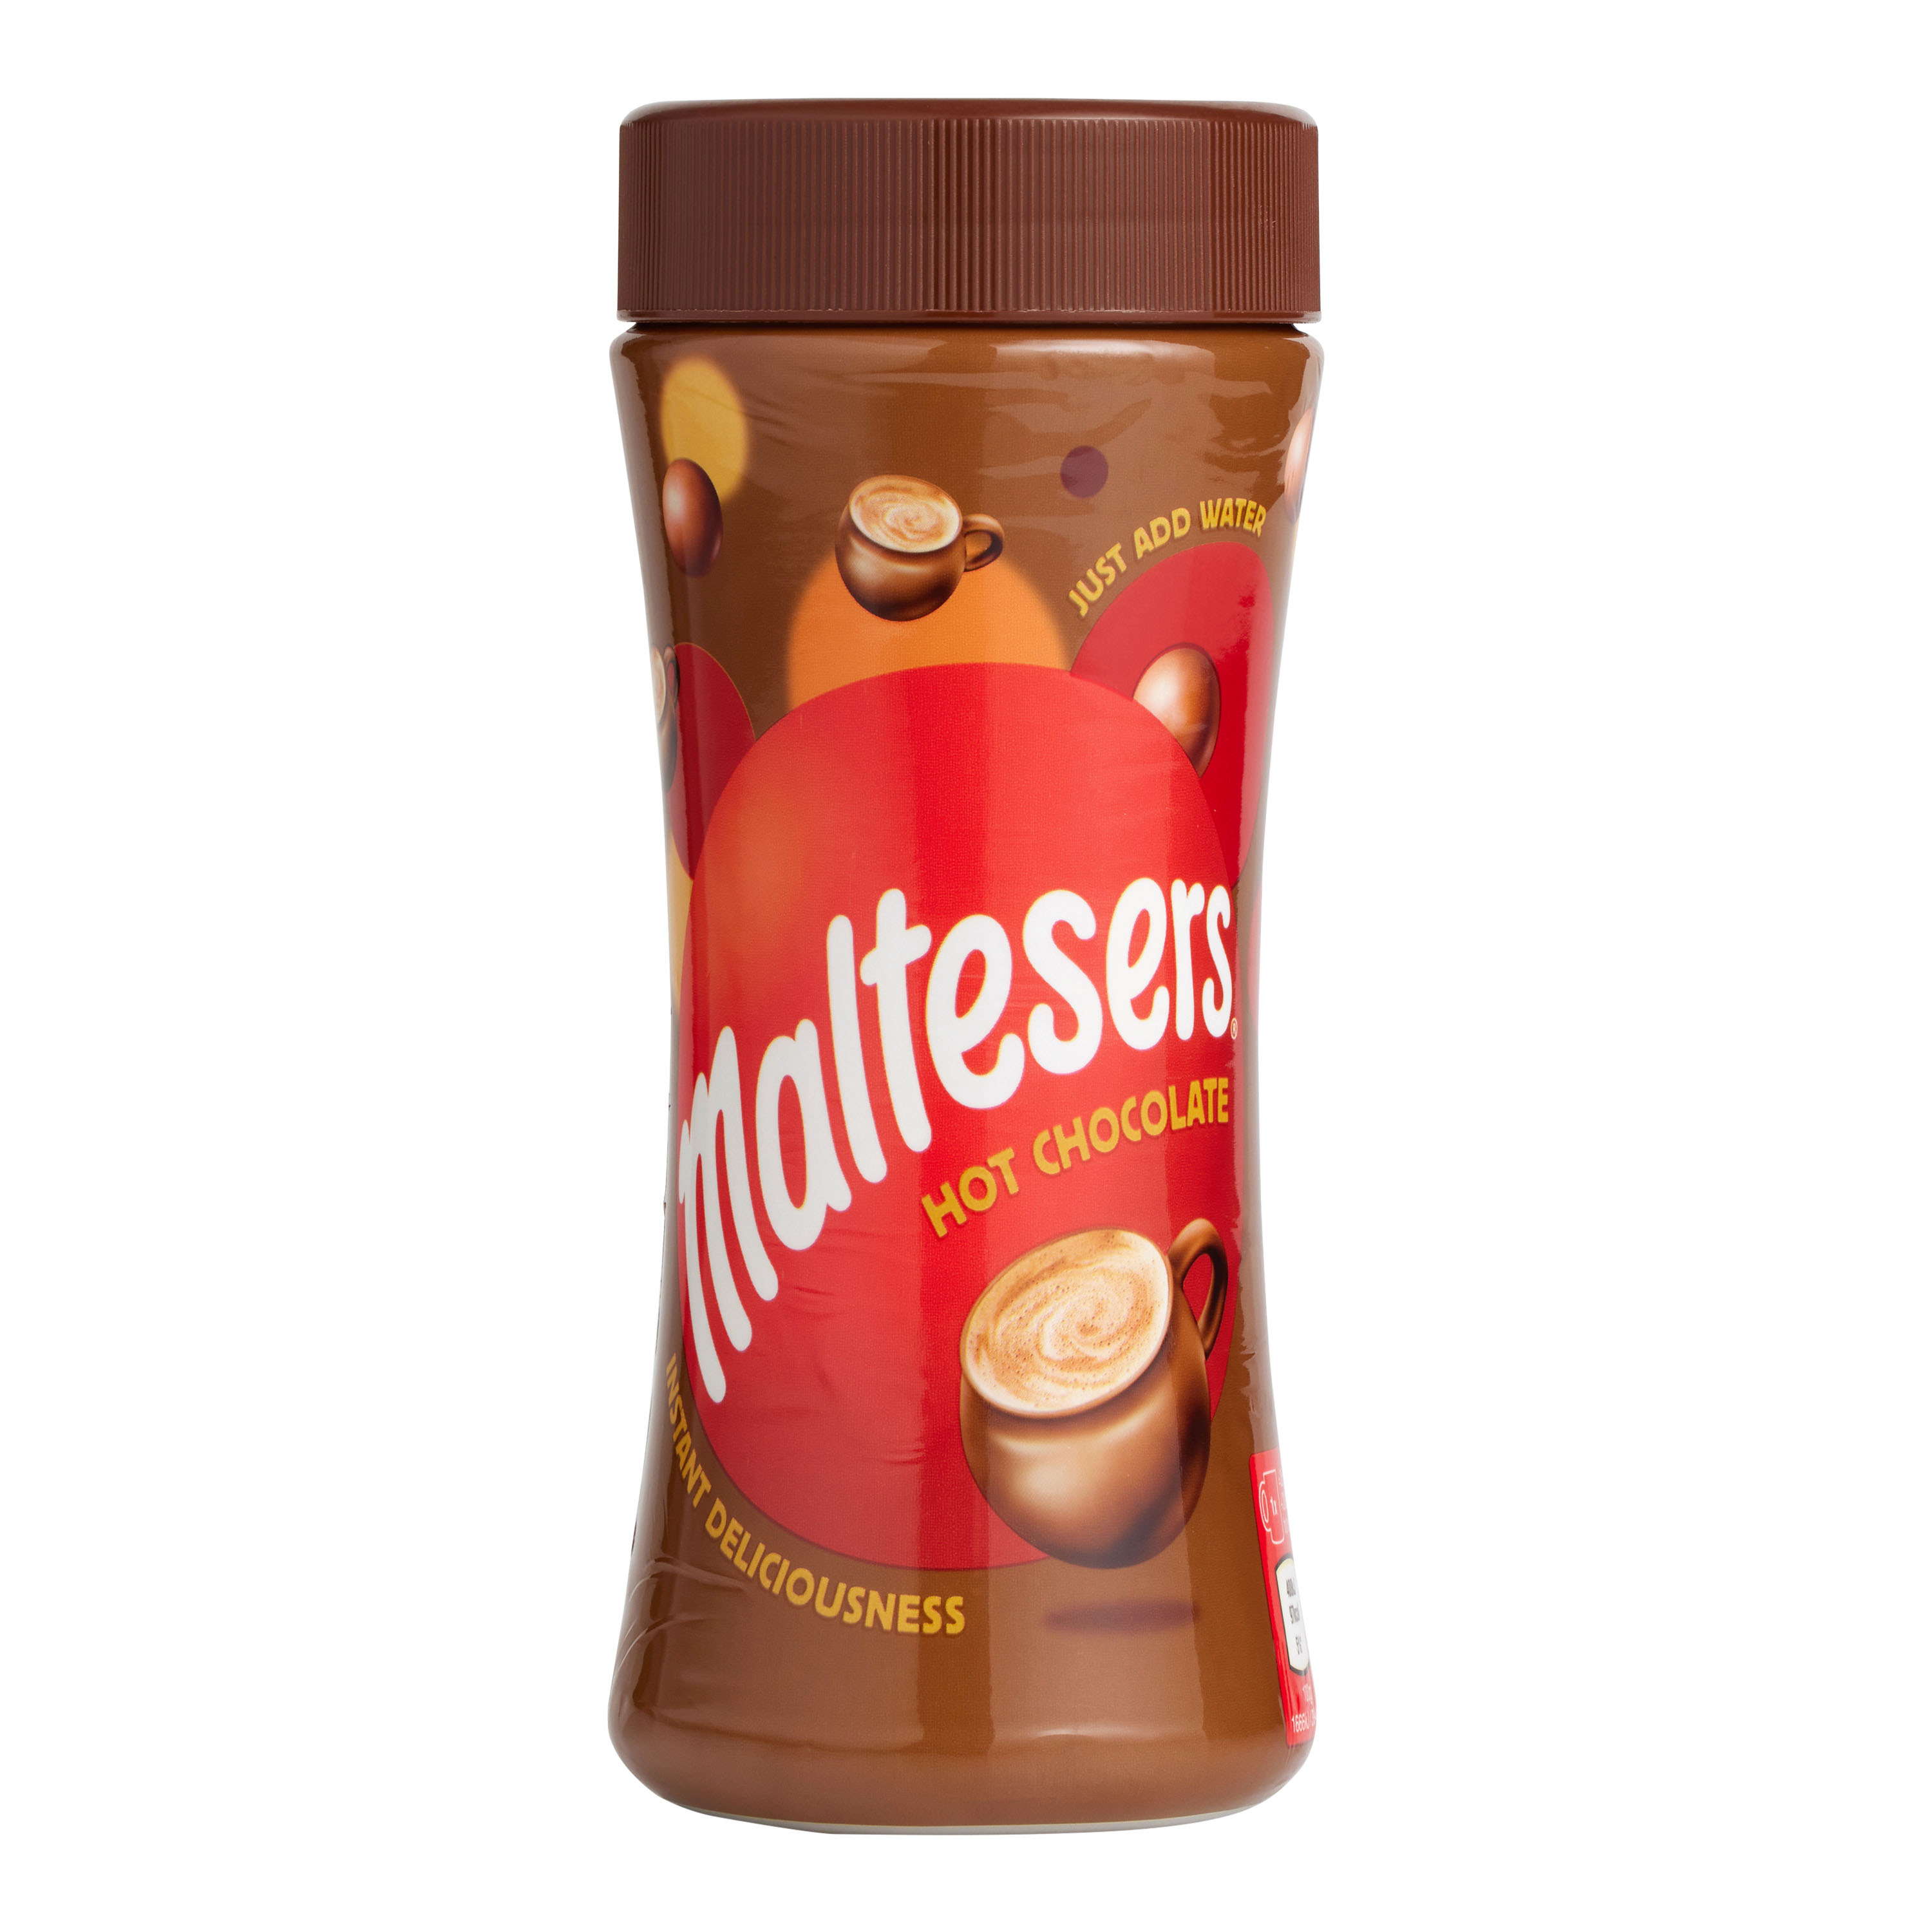 Malteasers Hot Chocolate Pods - Maltesers - 8